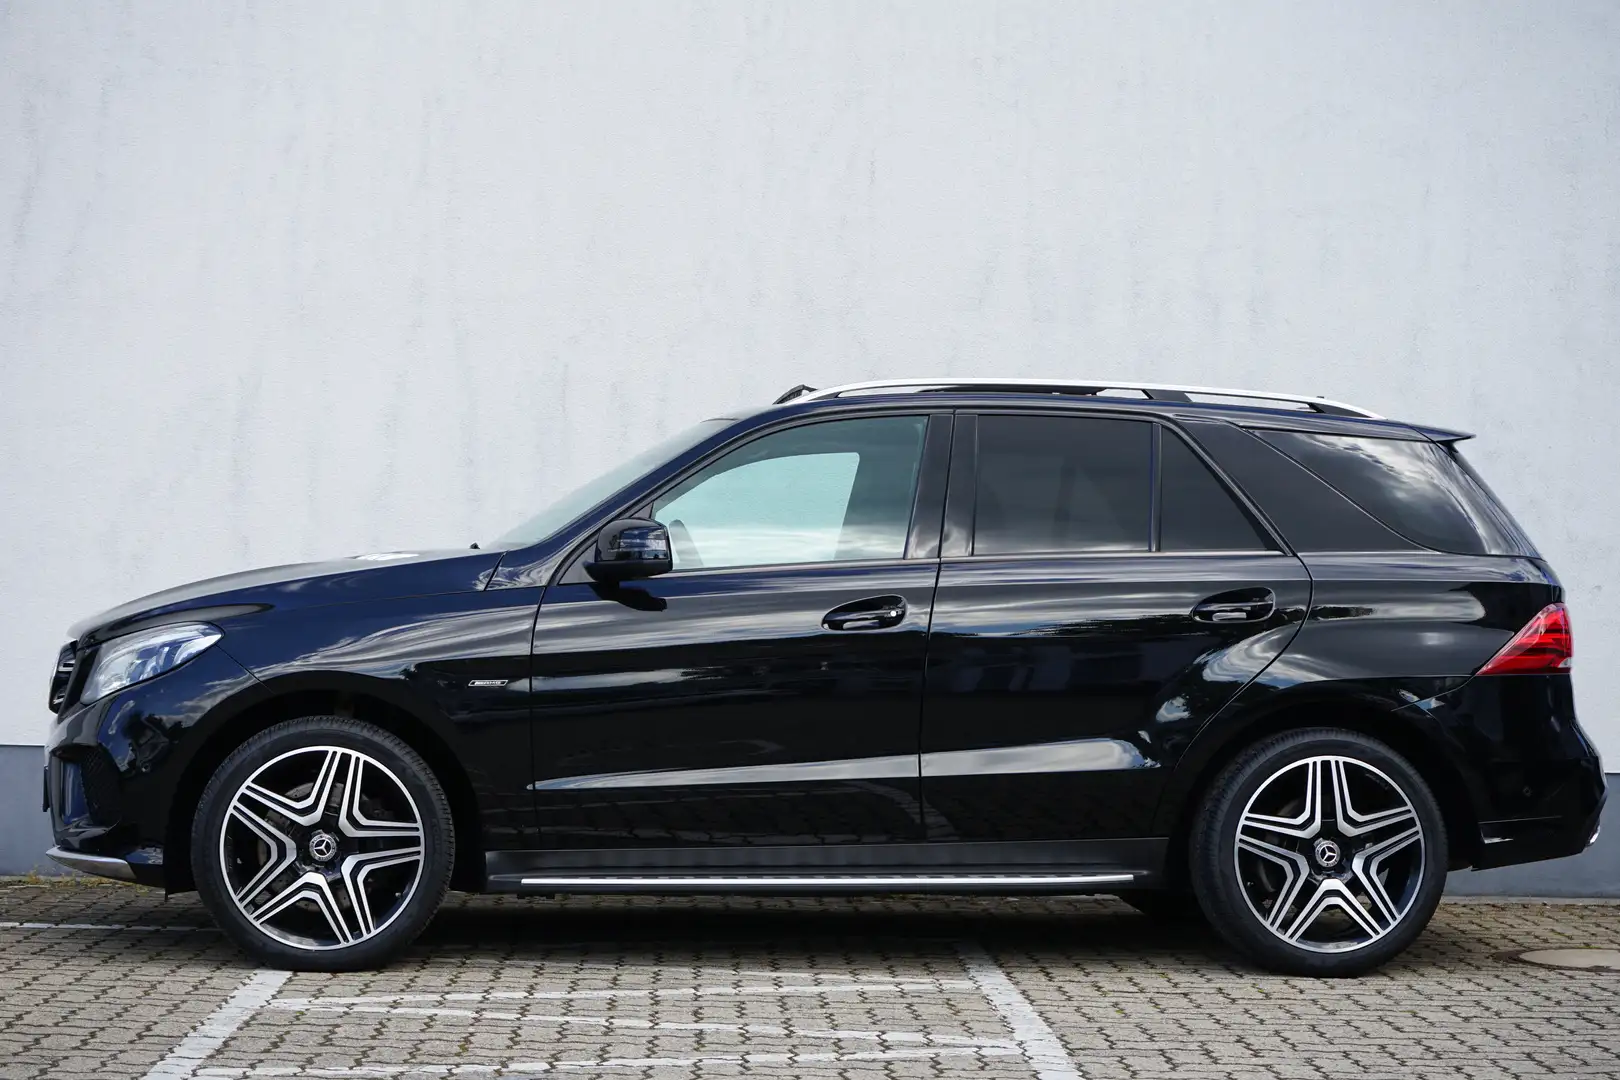 Mercedes-Benz GLE 450 4MATIC*21 Zoll*Panorama*LED ILS*Standheizung*Voll Siyah - 2